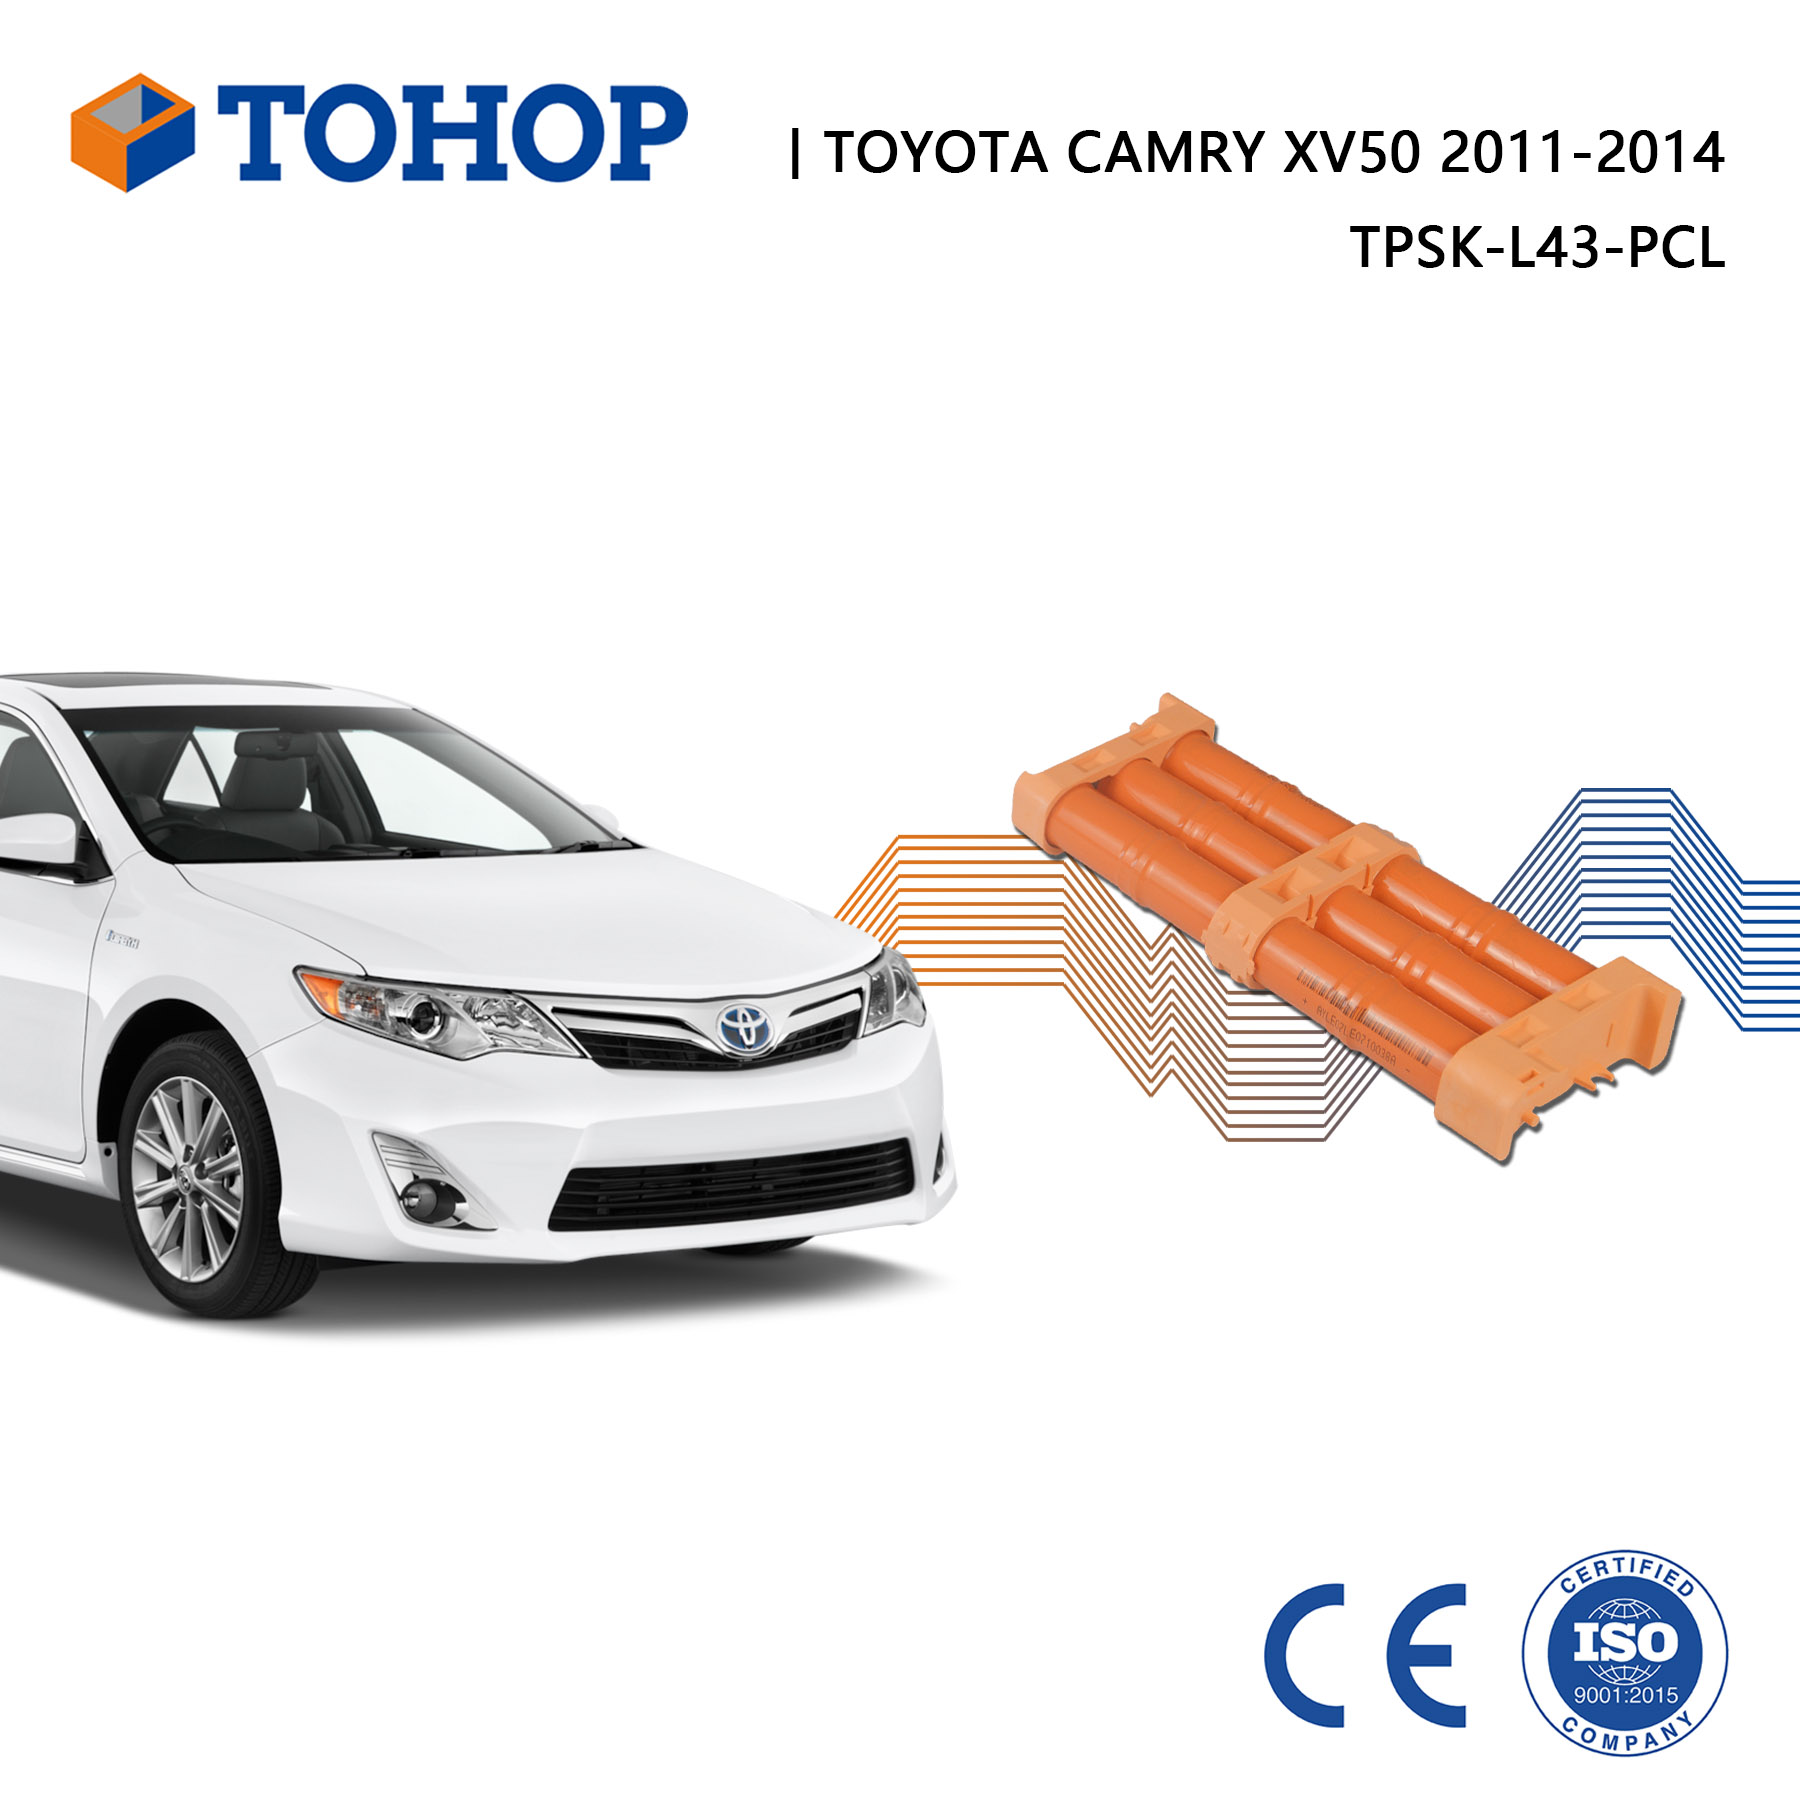 Batterie Hybride Nimh Toyota Camry pour XV50 2012-2016 14.4V 6.5Ah Cylindrique